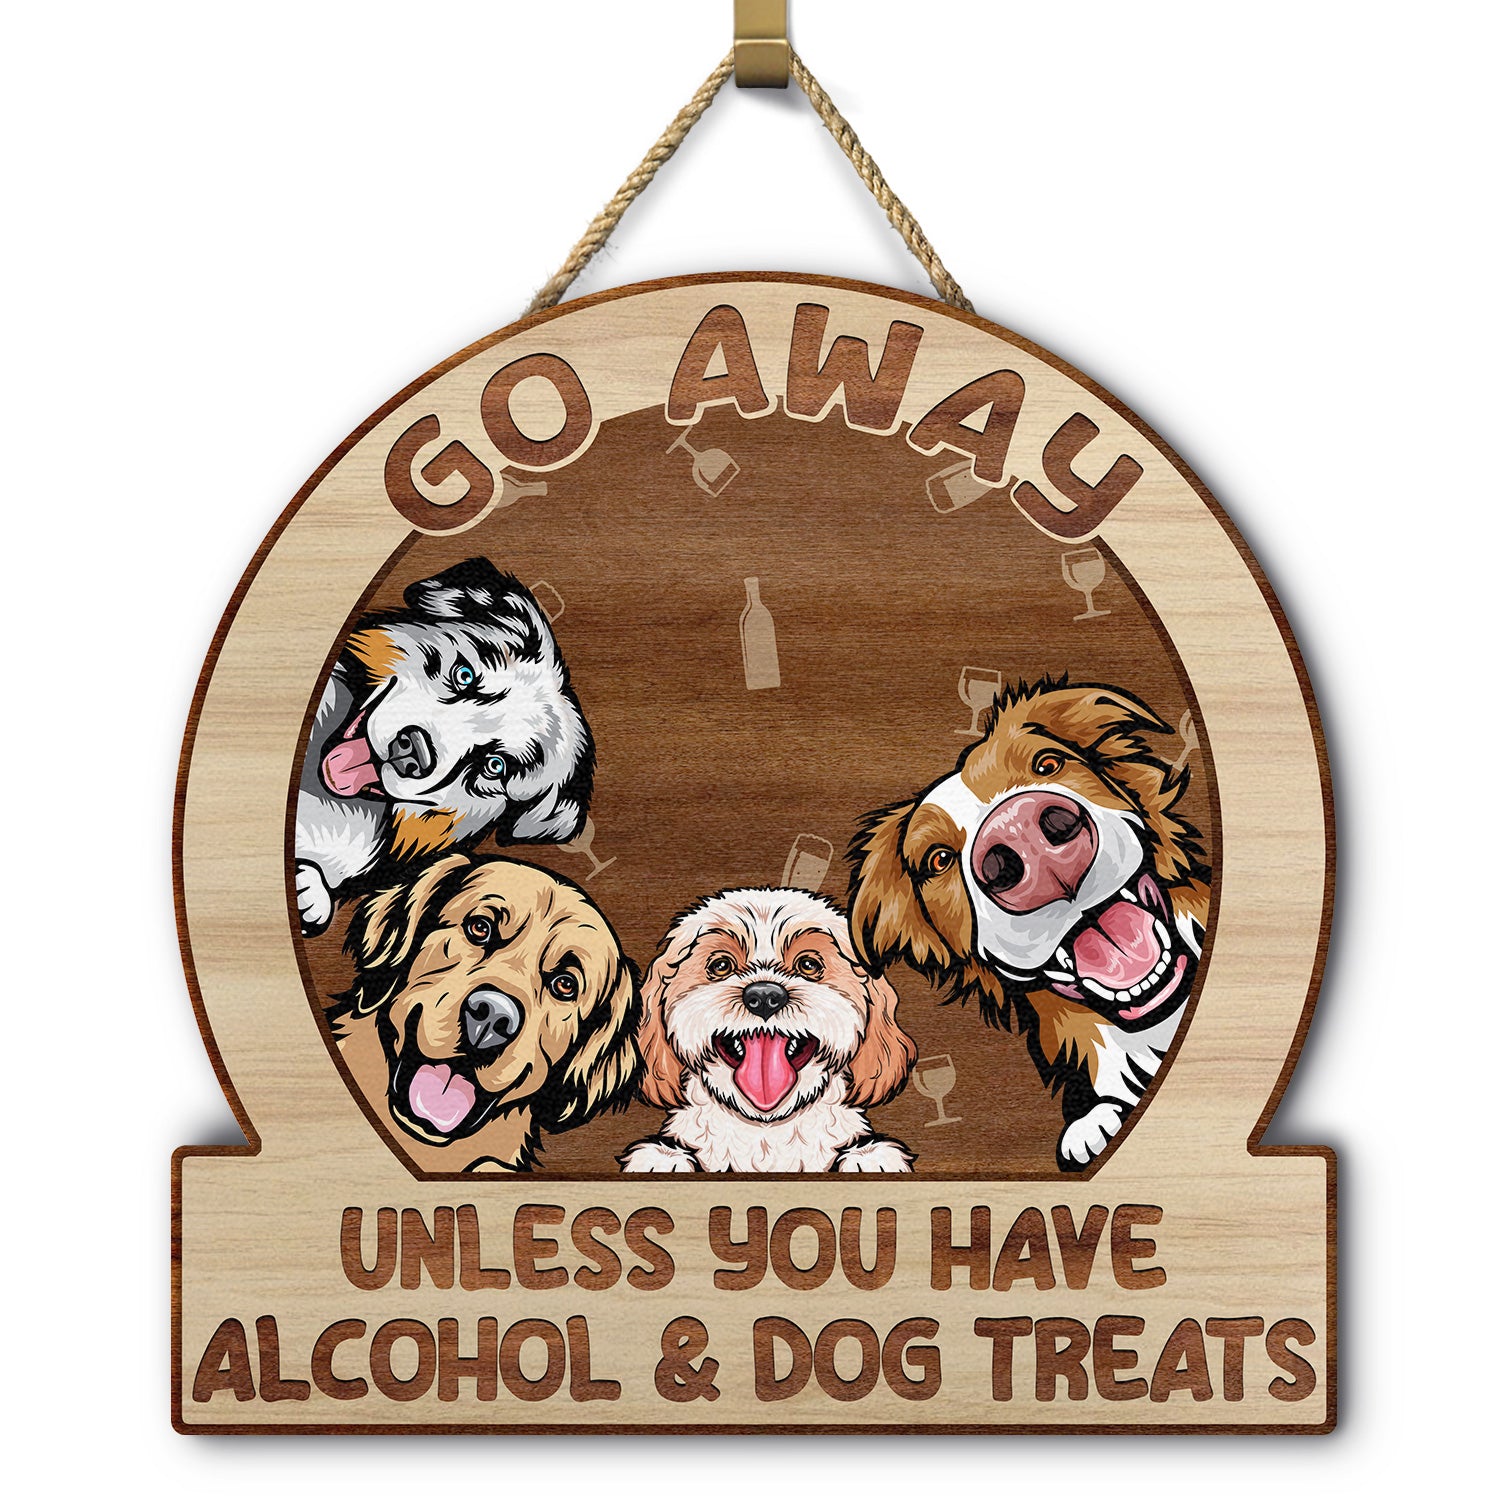 Go Away Unless You Have Alcohol And Dog Treats Cat Treats Pet Treats - Gift For Dog Lovers & Cat Lovers - Personalized Custom Shaped Wood Sign